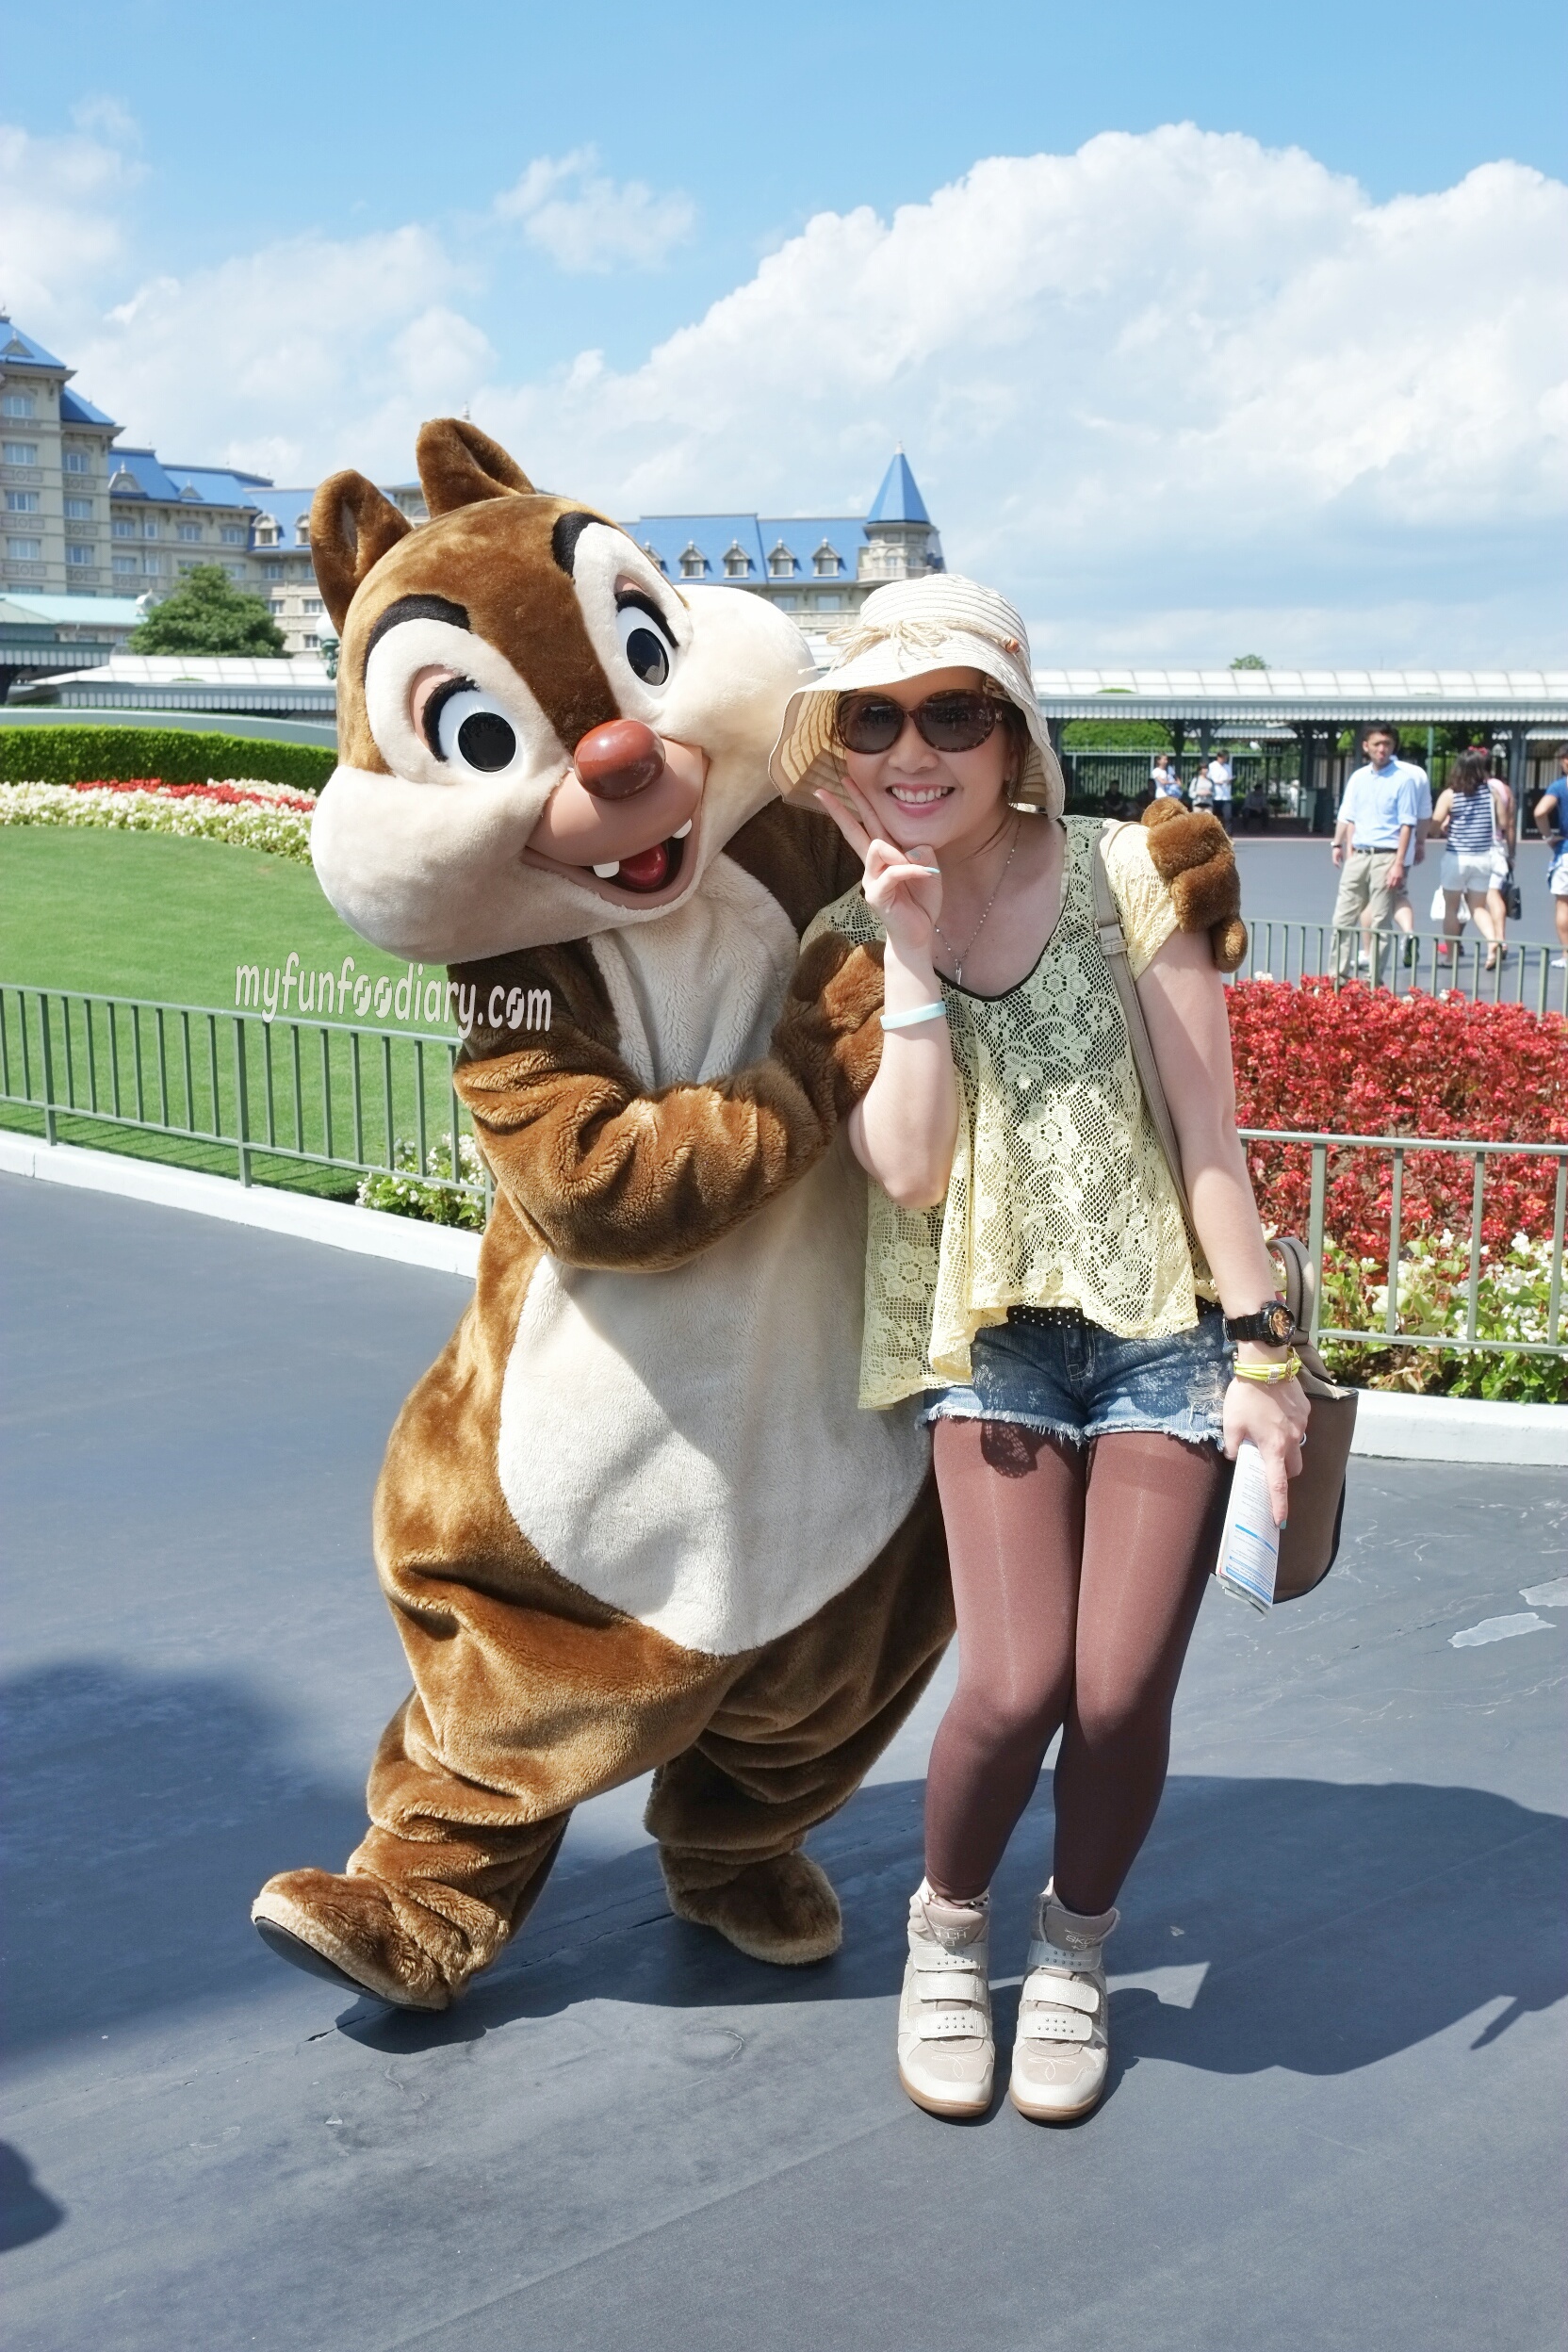 Me and Dale Chipmunk at Tokyo Disneyland by Myfunfoodiary